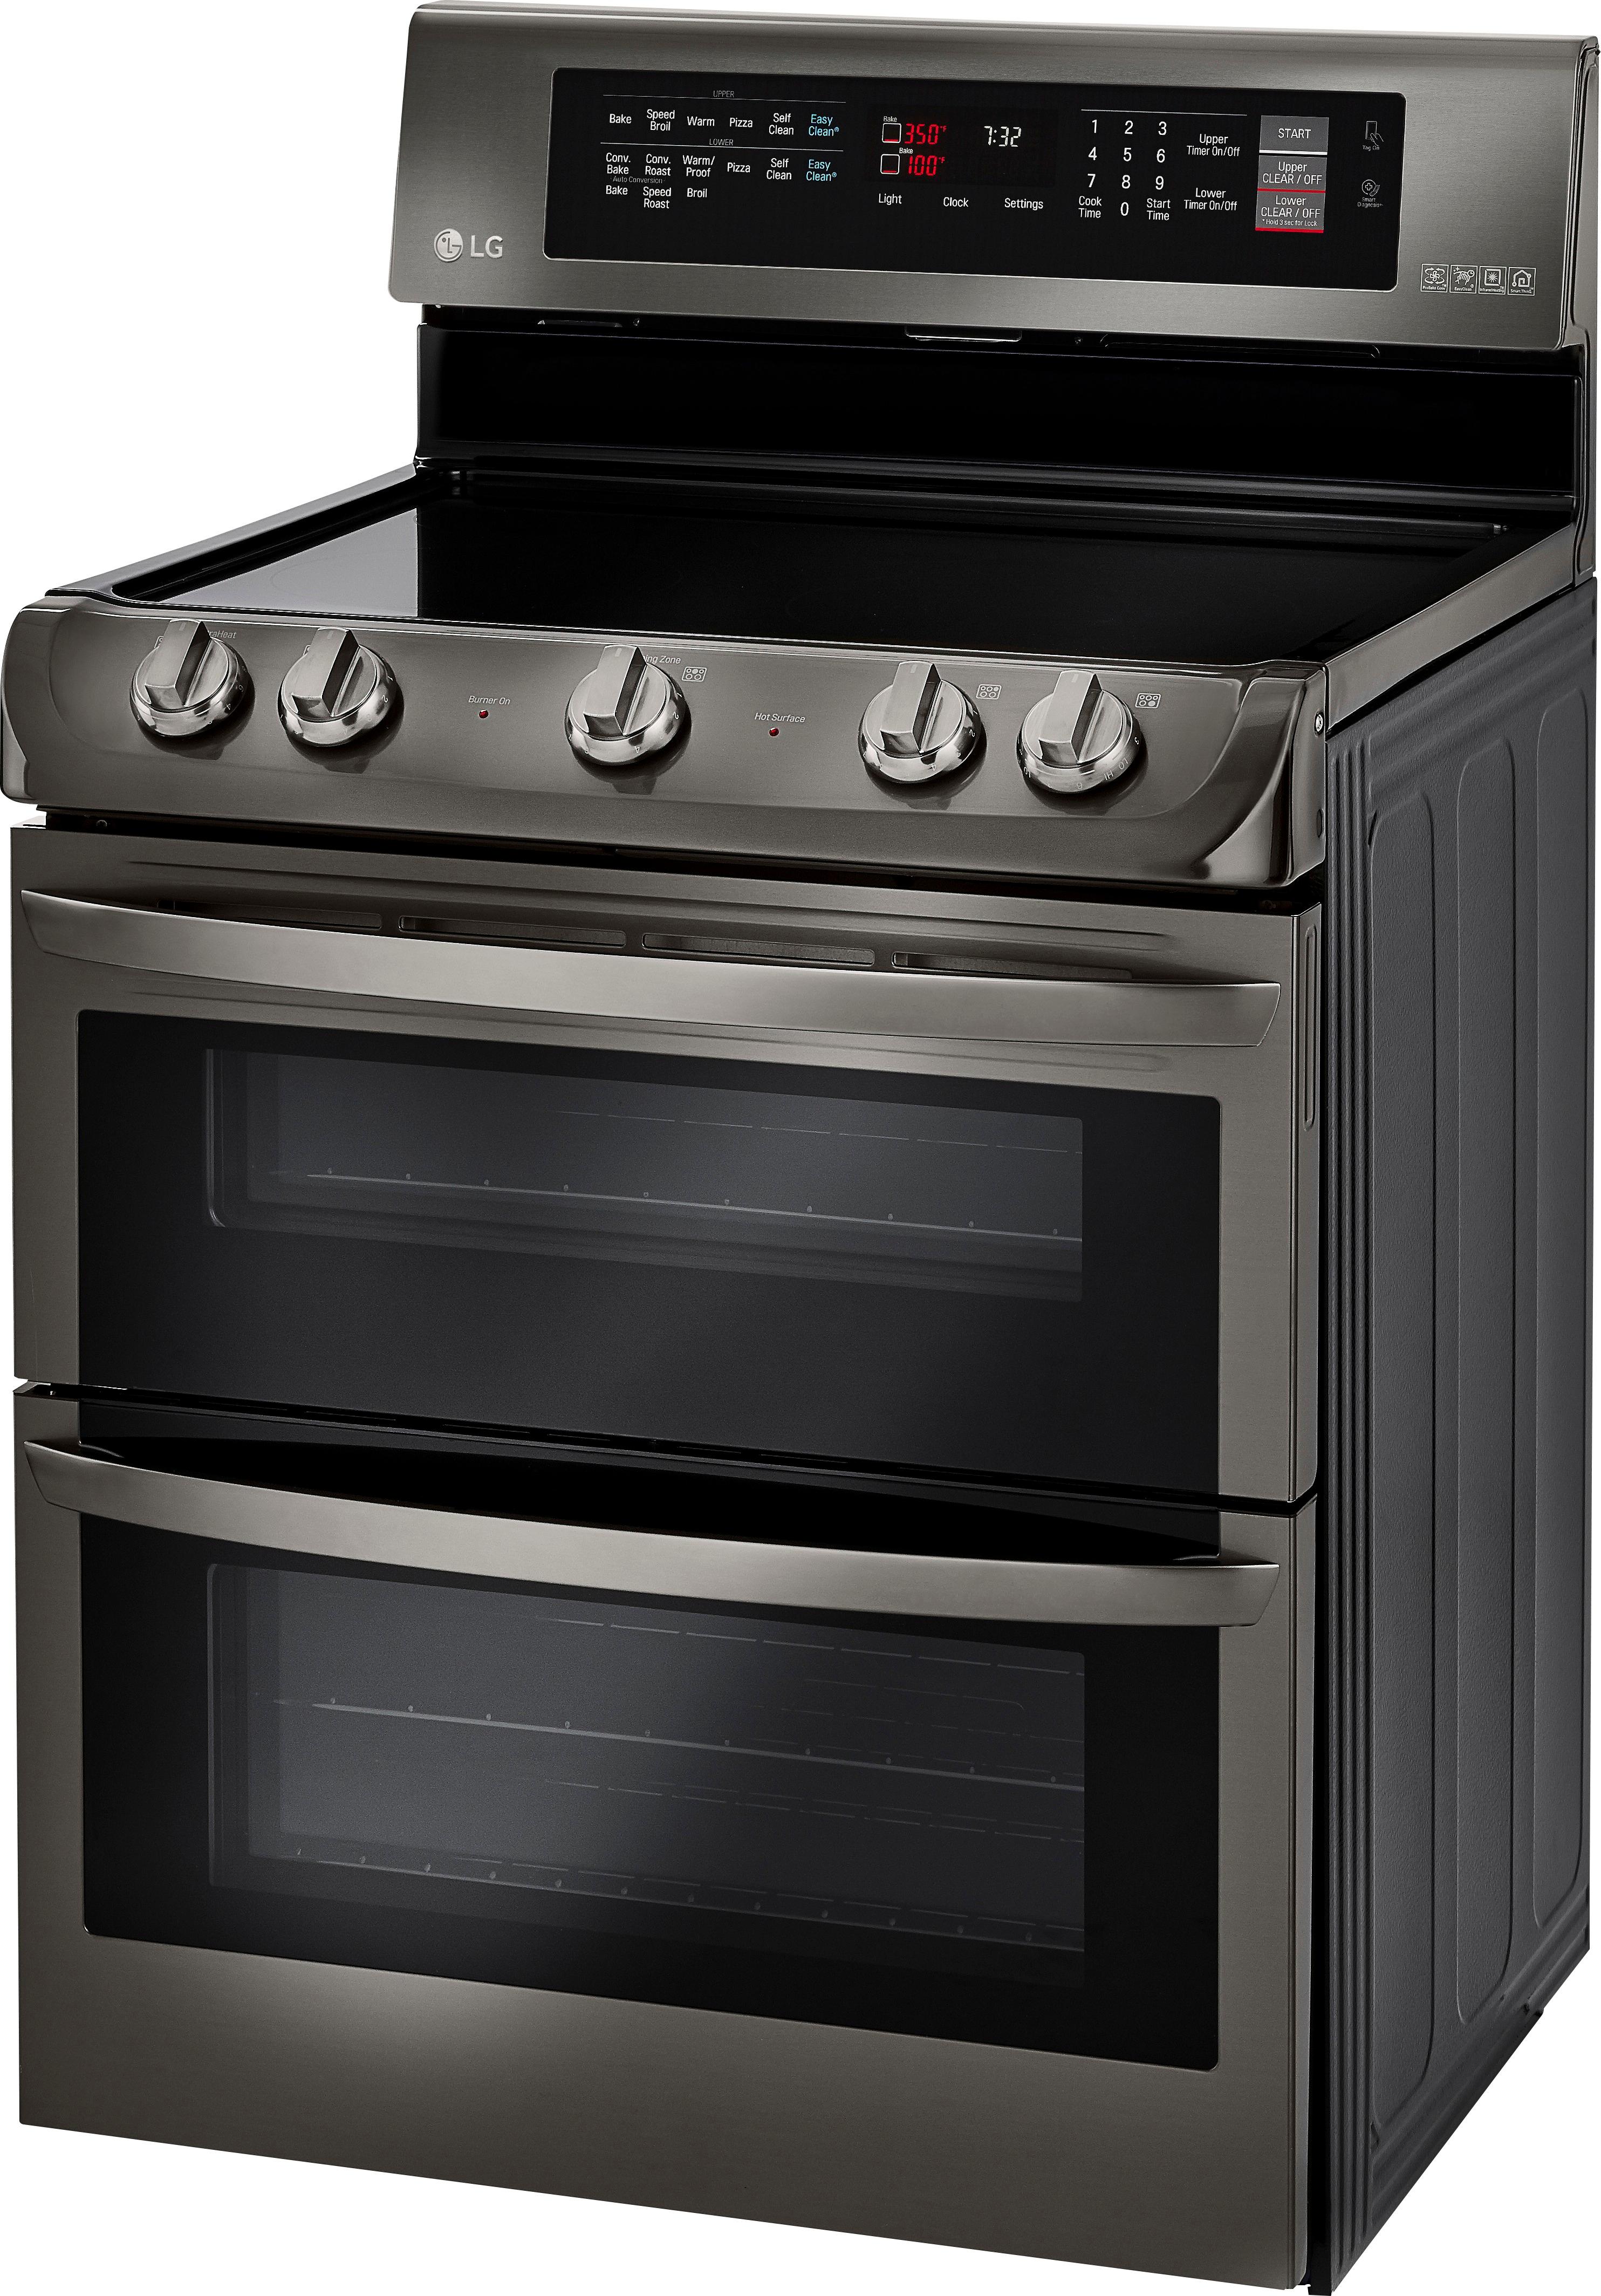 LG 7.3 Cu. Ft. Self-Cleaning Freestanding Double Oven Electric Range Black Stainless Steel Stove Electric